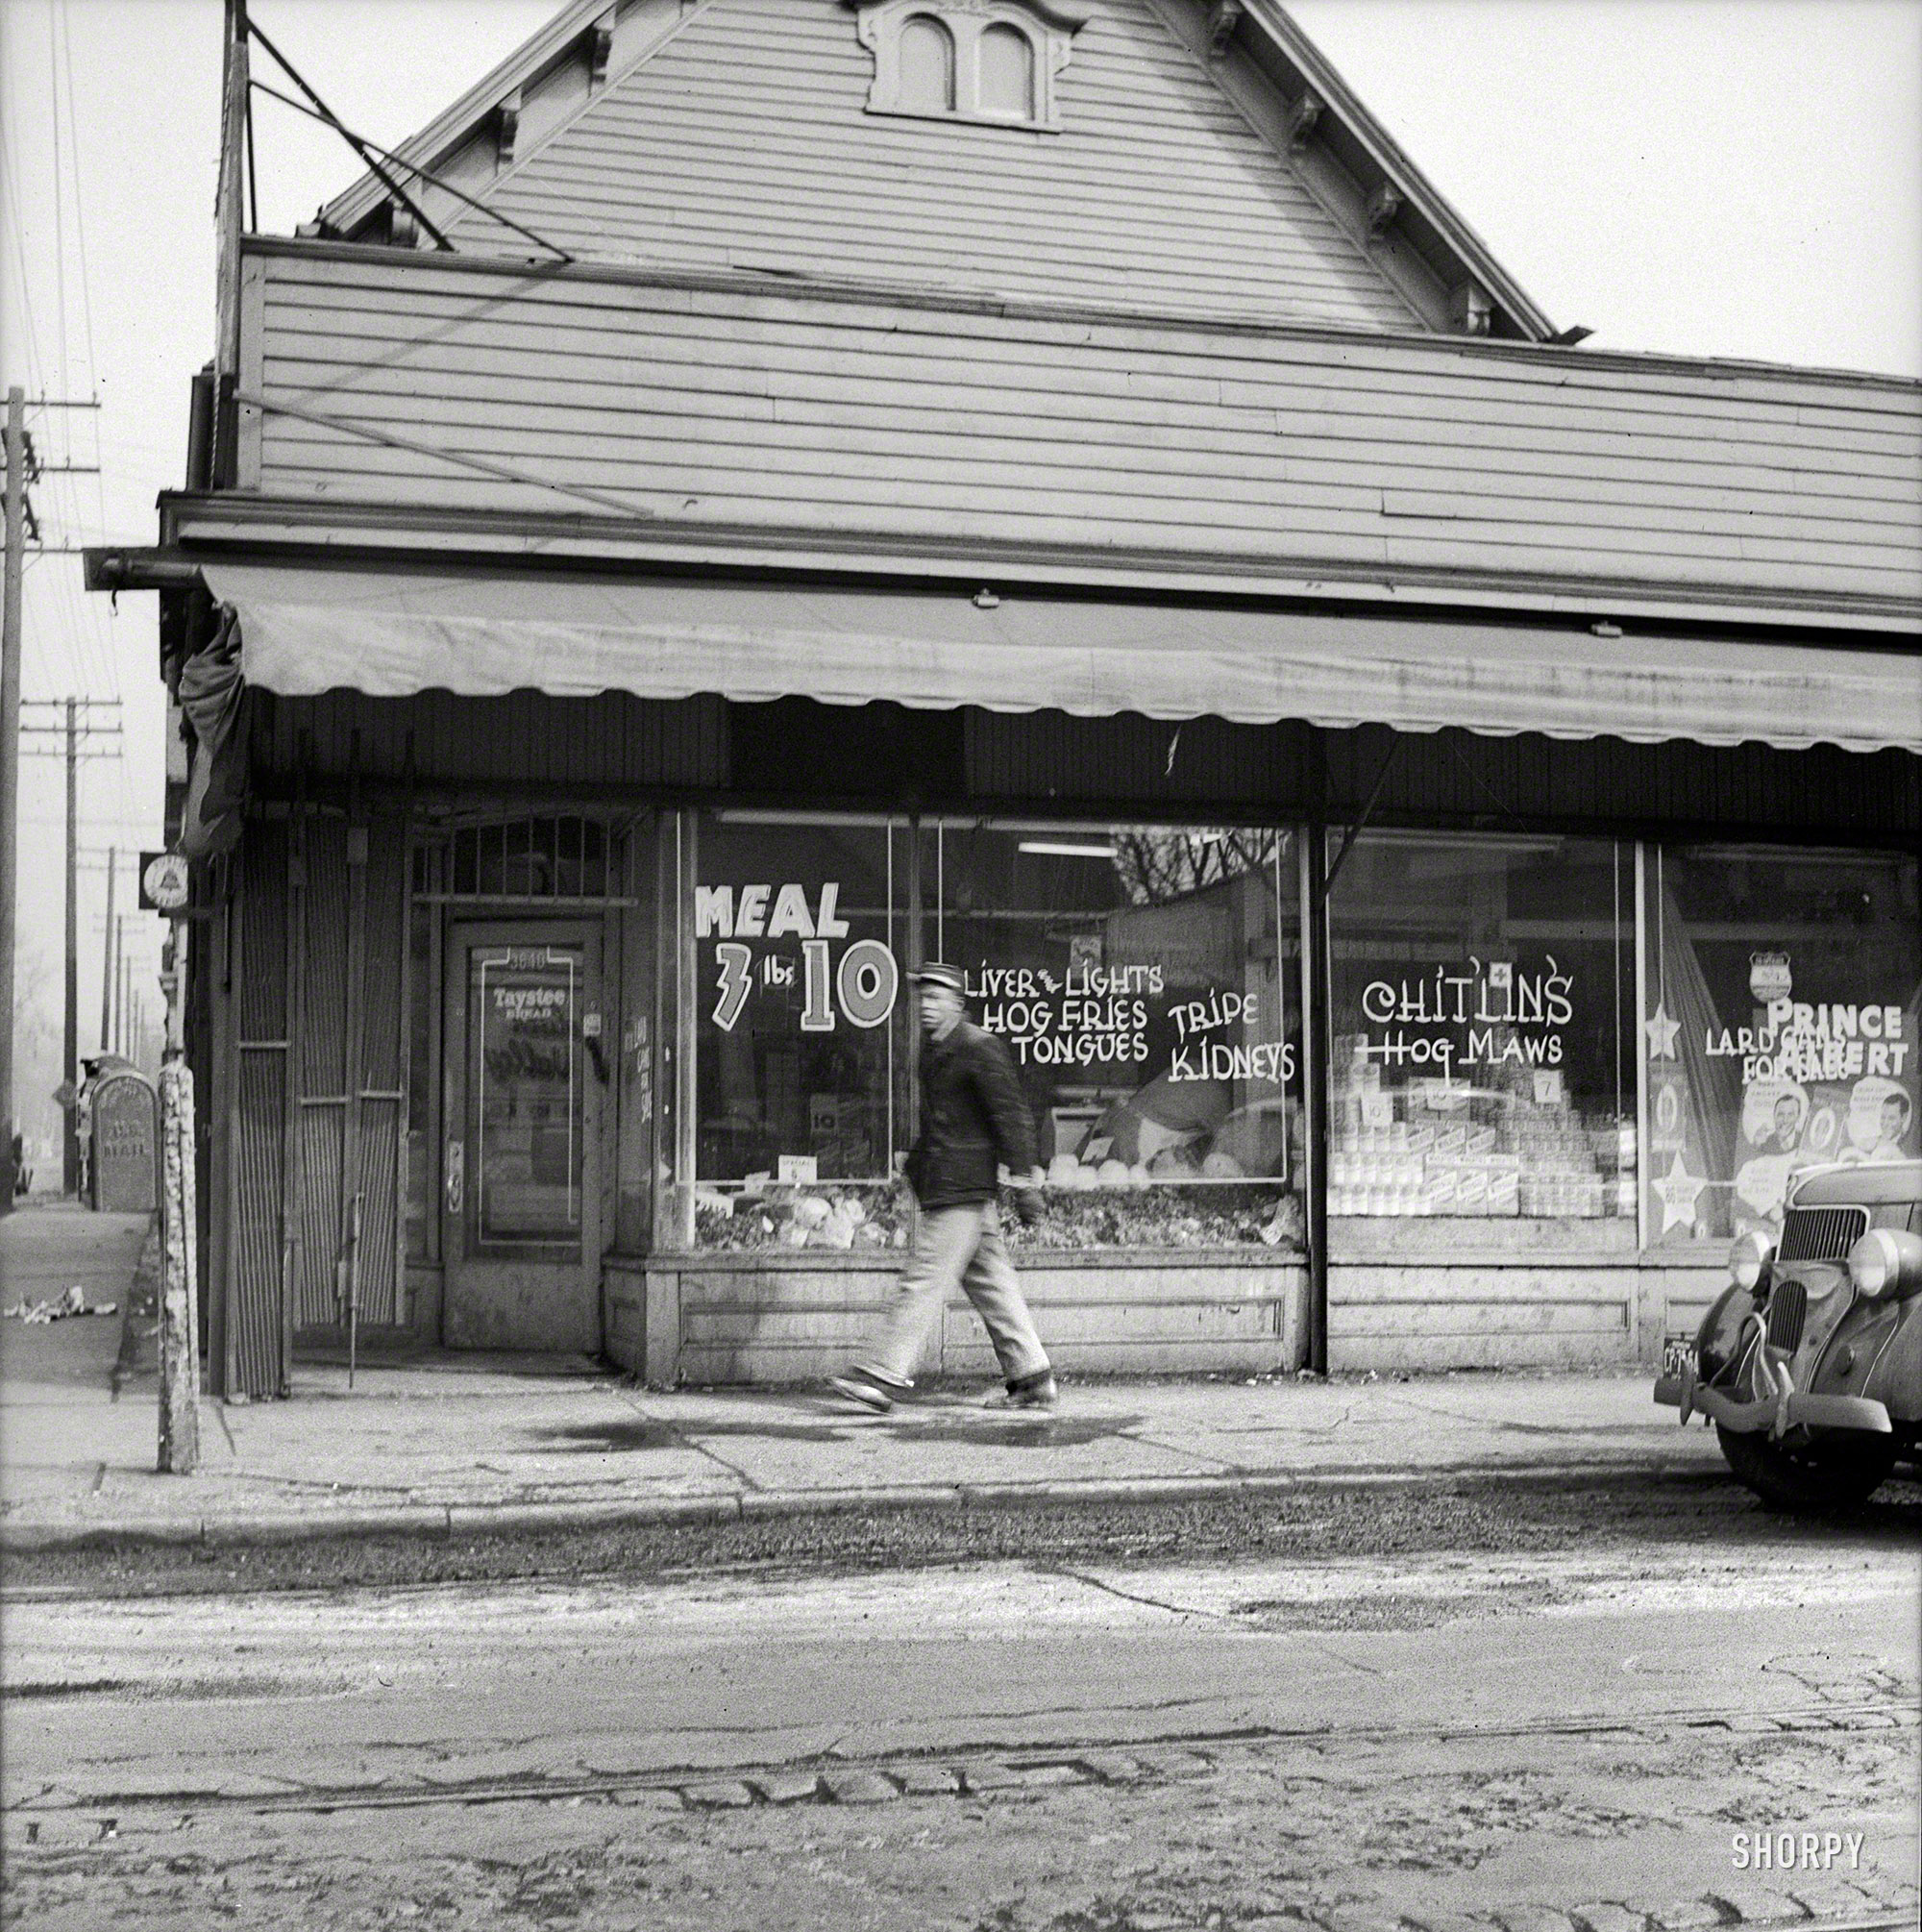 February 1942. Detroit, Michigan. "Sign in a grocery window in the Negro district: 'chitlins and hog maws'." Not to mention Taystee Bread. Medium-format nitrate negative by Arthur Siegel for the Office of War Information. View full size.